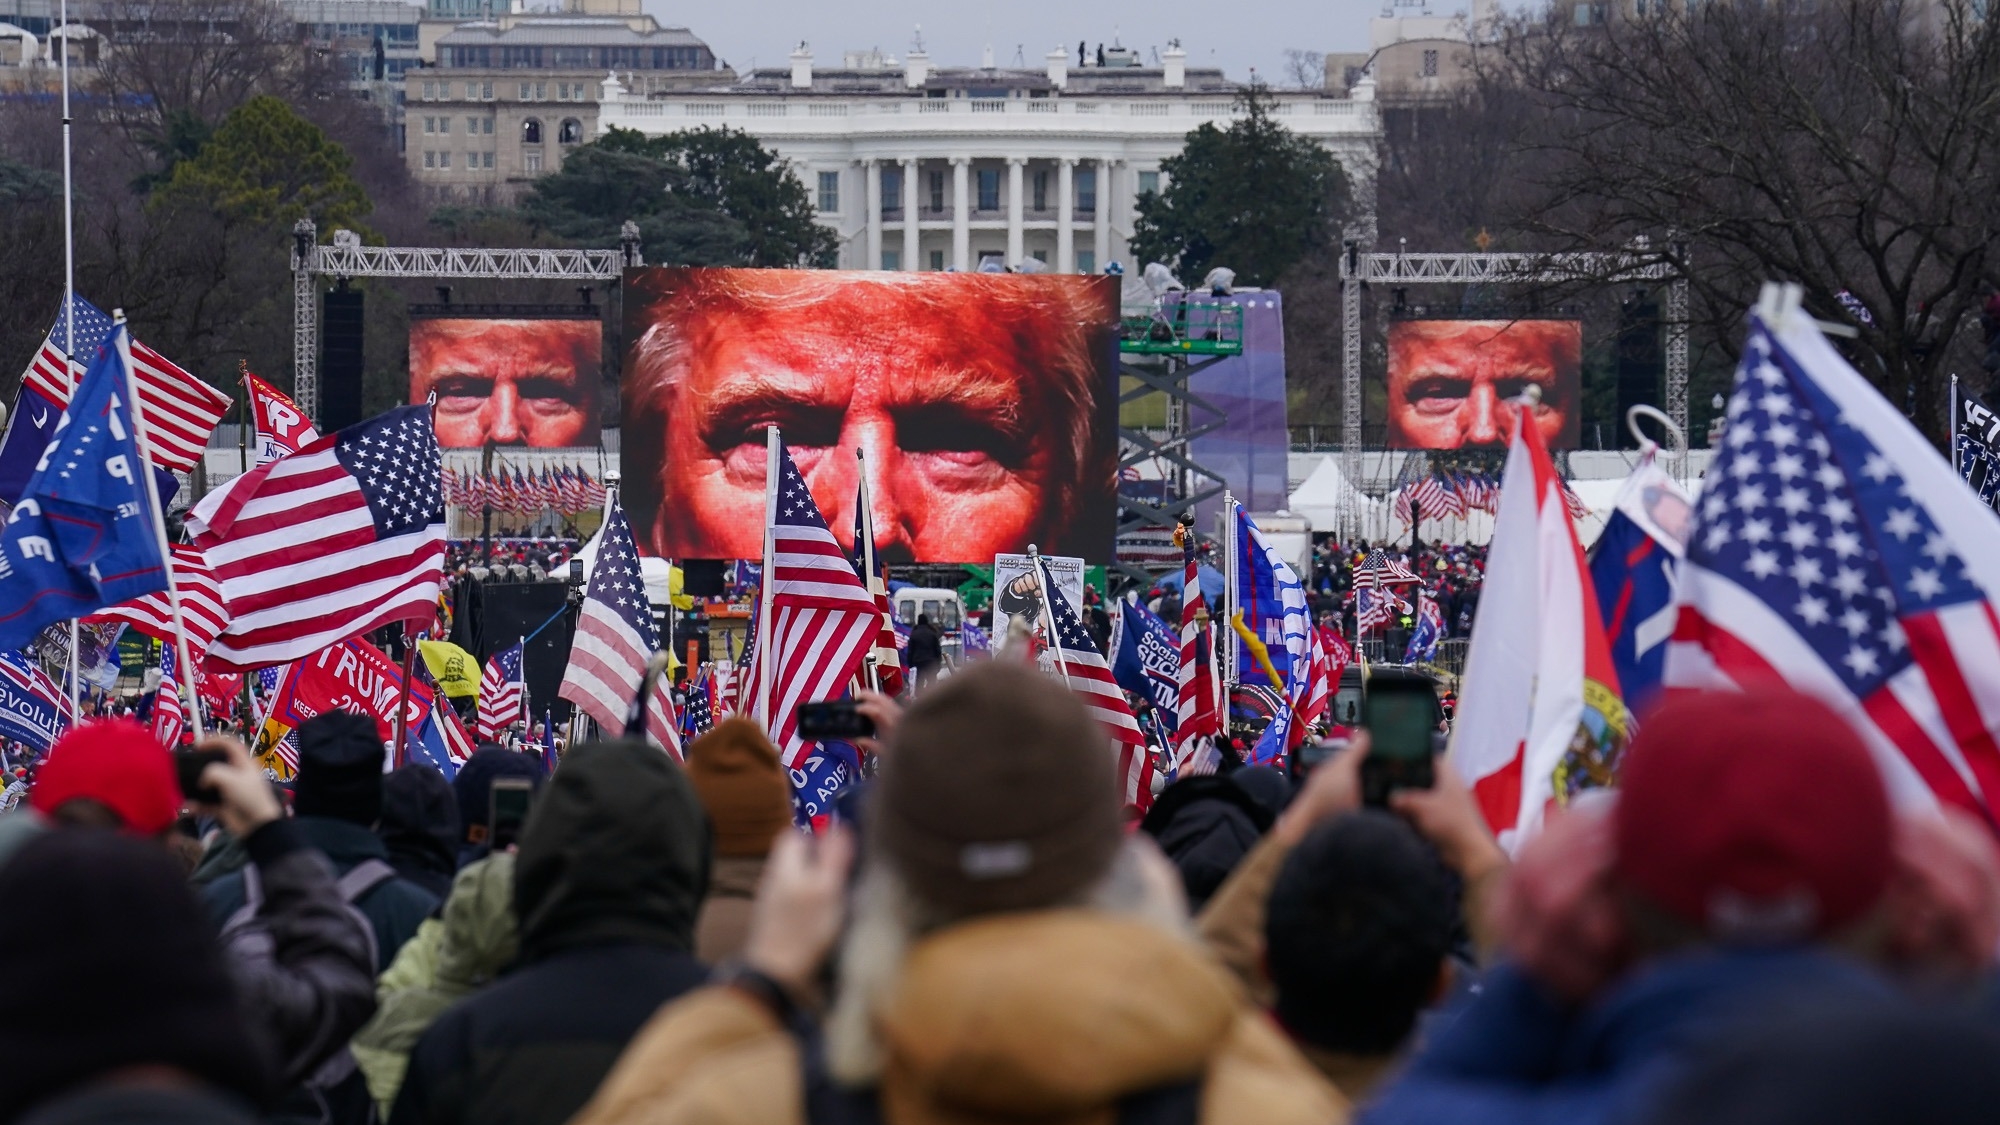 FILE - Supporters of Donald Trump participate in a rally in Washington, Jan. 6, 2021. The Supreme Court is hearing arguments Tuesday, April 16, 2024, over the charge of obstruction of an official proceeding that has been brought against 330 people, according to the Justice Department. The charge refers to the disruption of Congress' certification of Joe Biden's 2020 presidential election victory over former President Trump. Trump faces two obstruction charges. Next week, the justices will weigh whether Trump can be prosecuted at all for his efforts to overturn the 2020 election results. (AP Photo/John Minchillo, File)